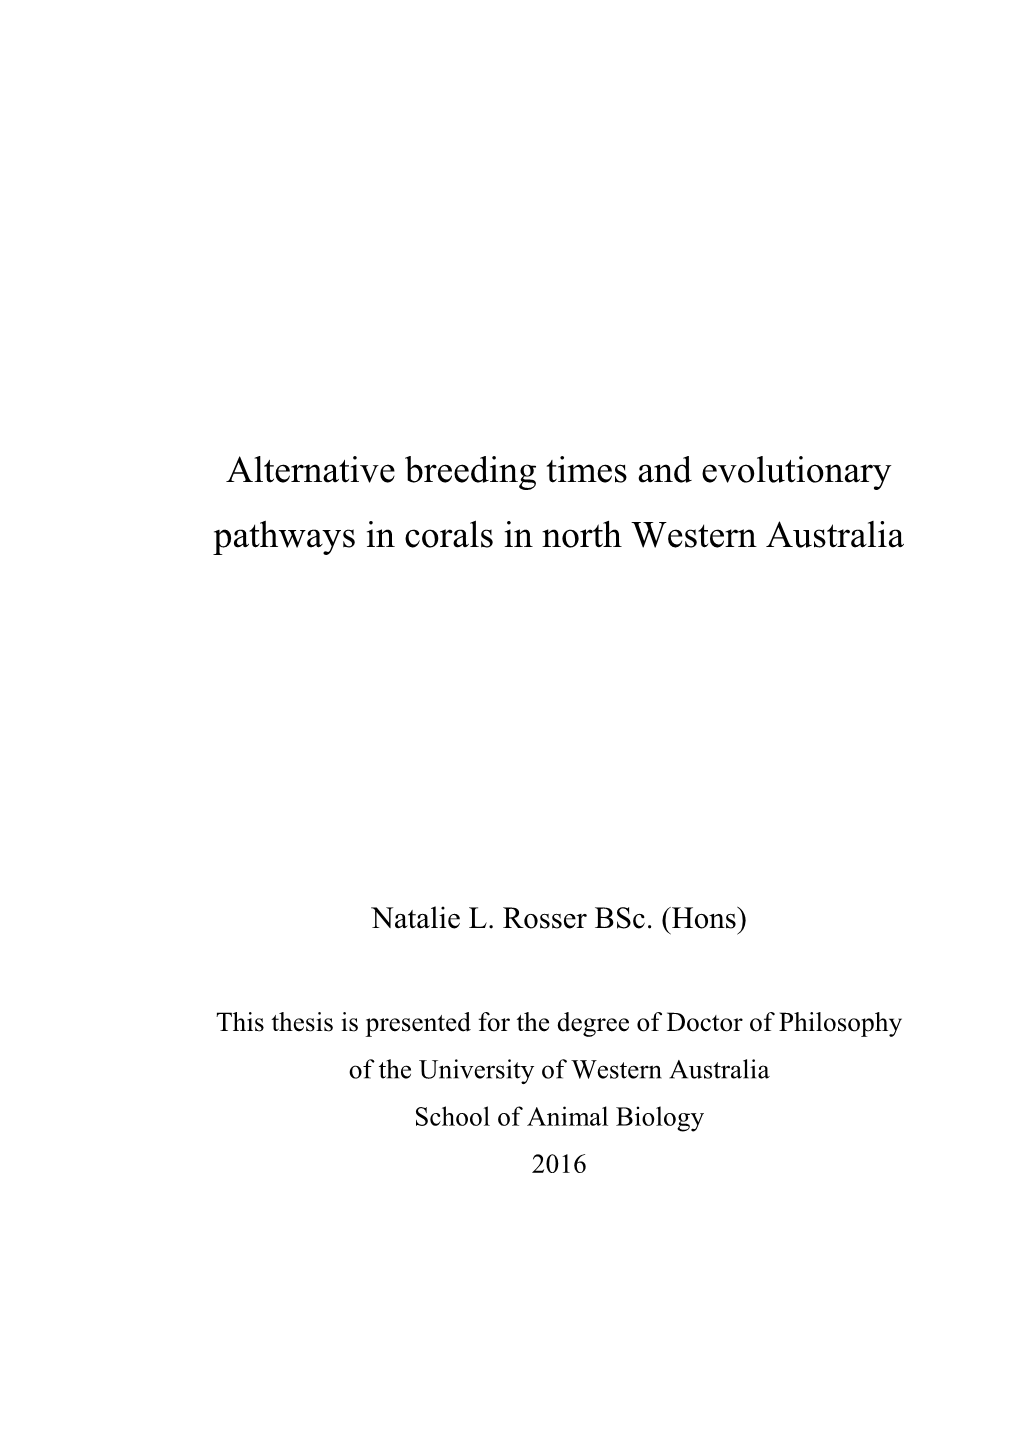 Thesis Is Presented for the Degree of Doctor of Philosophy of the University of Western Australia School of Animal Biology 2016